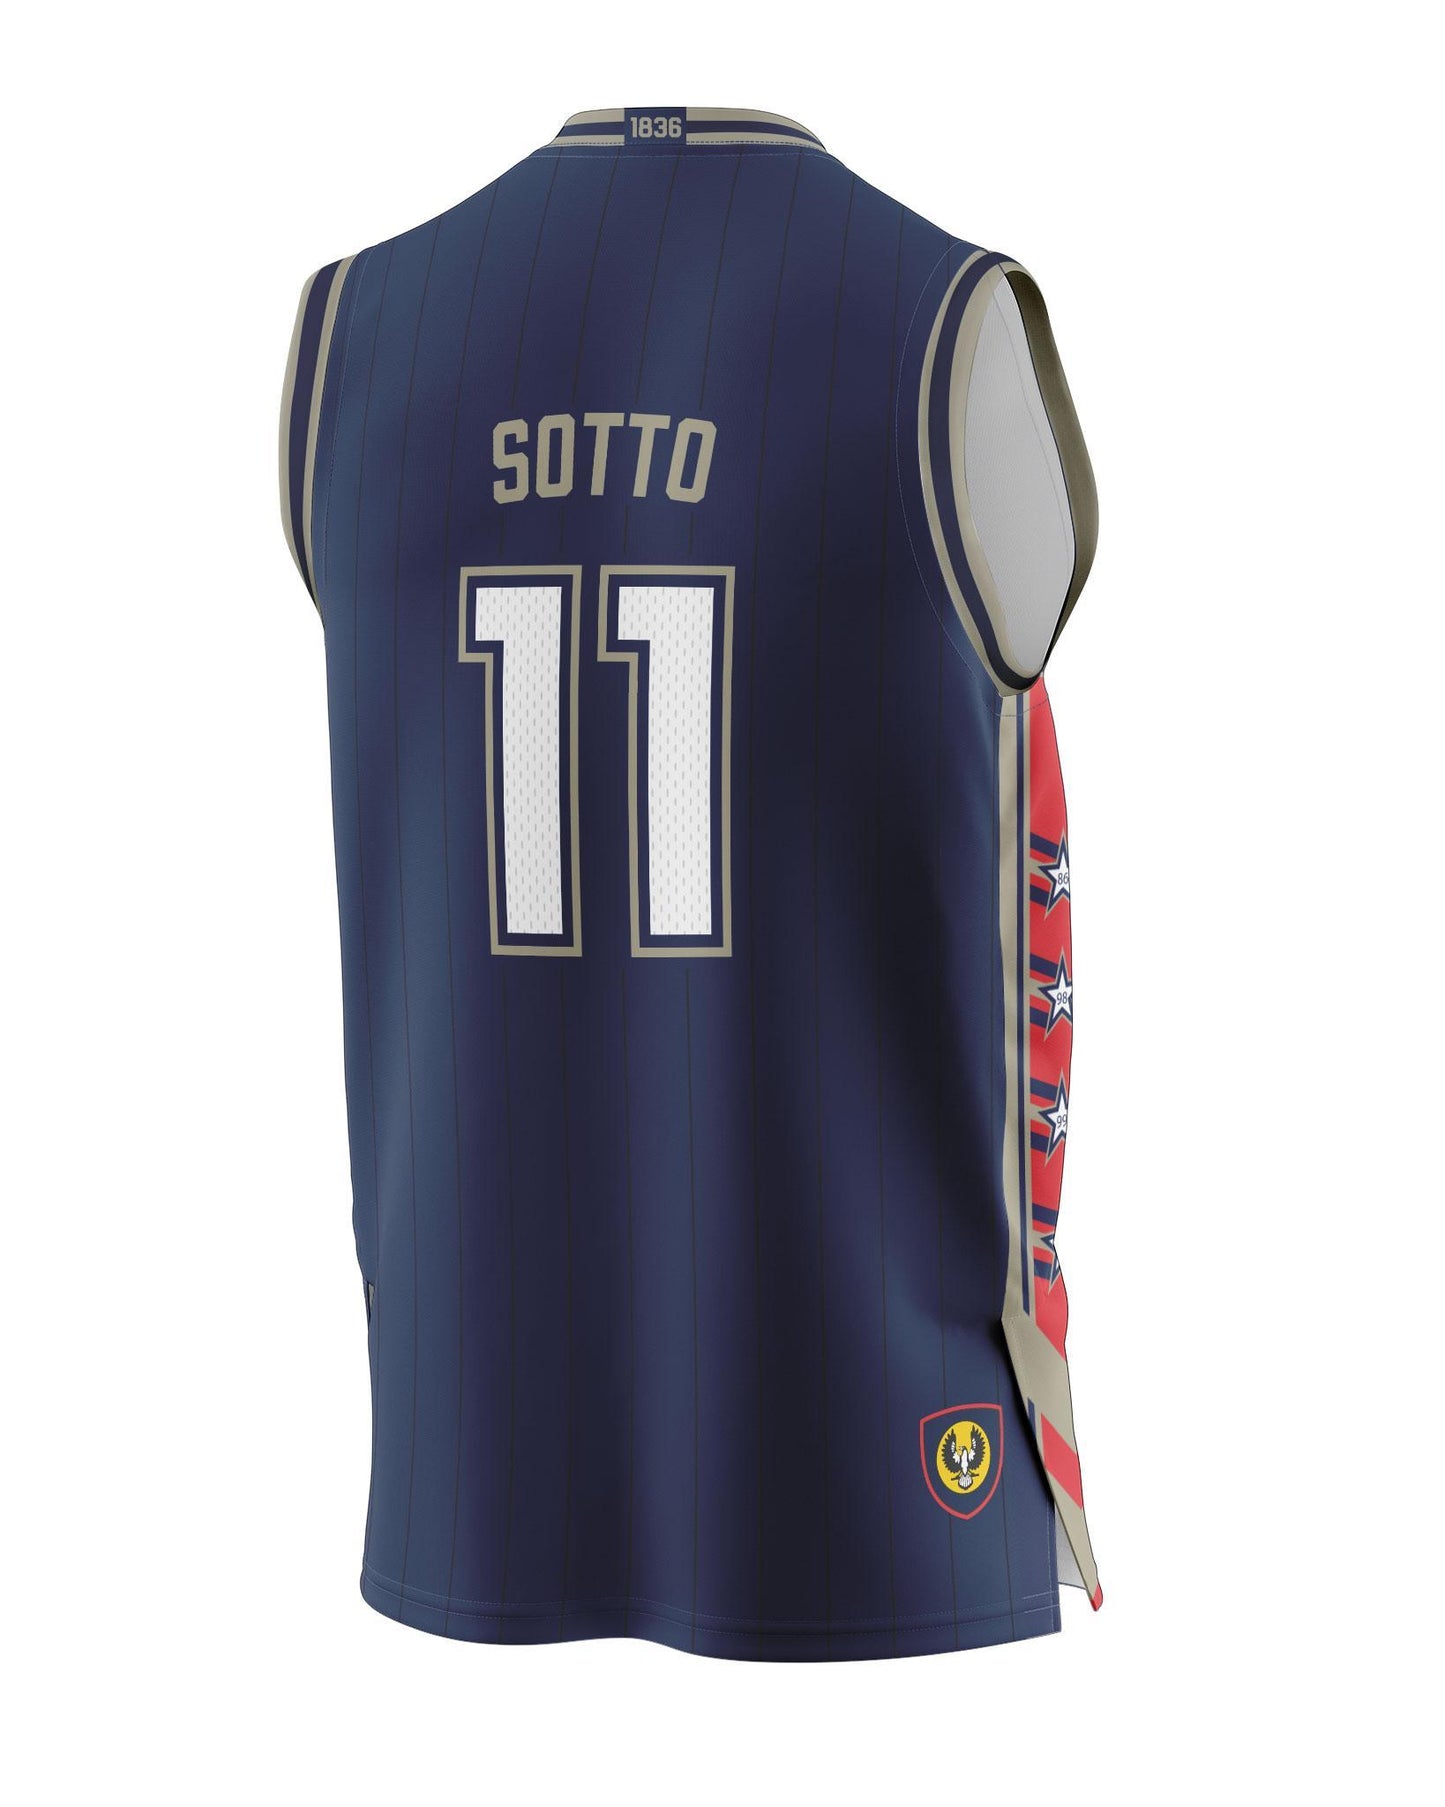 Adelaide 36ers 2021/22 Authentic Adult Home Jersey - Kai Sotto - Adelaide 36ers